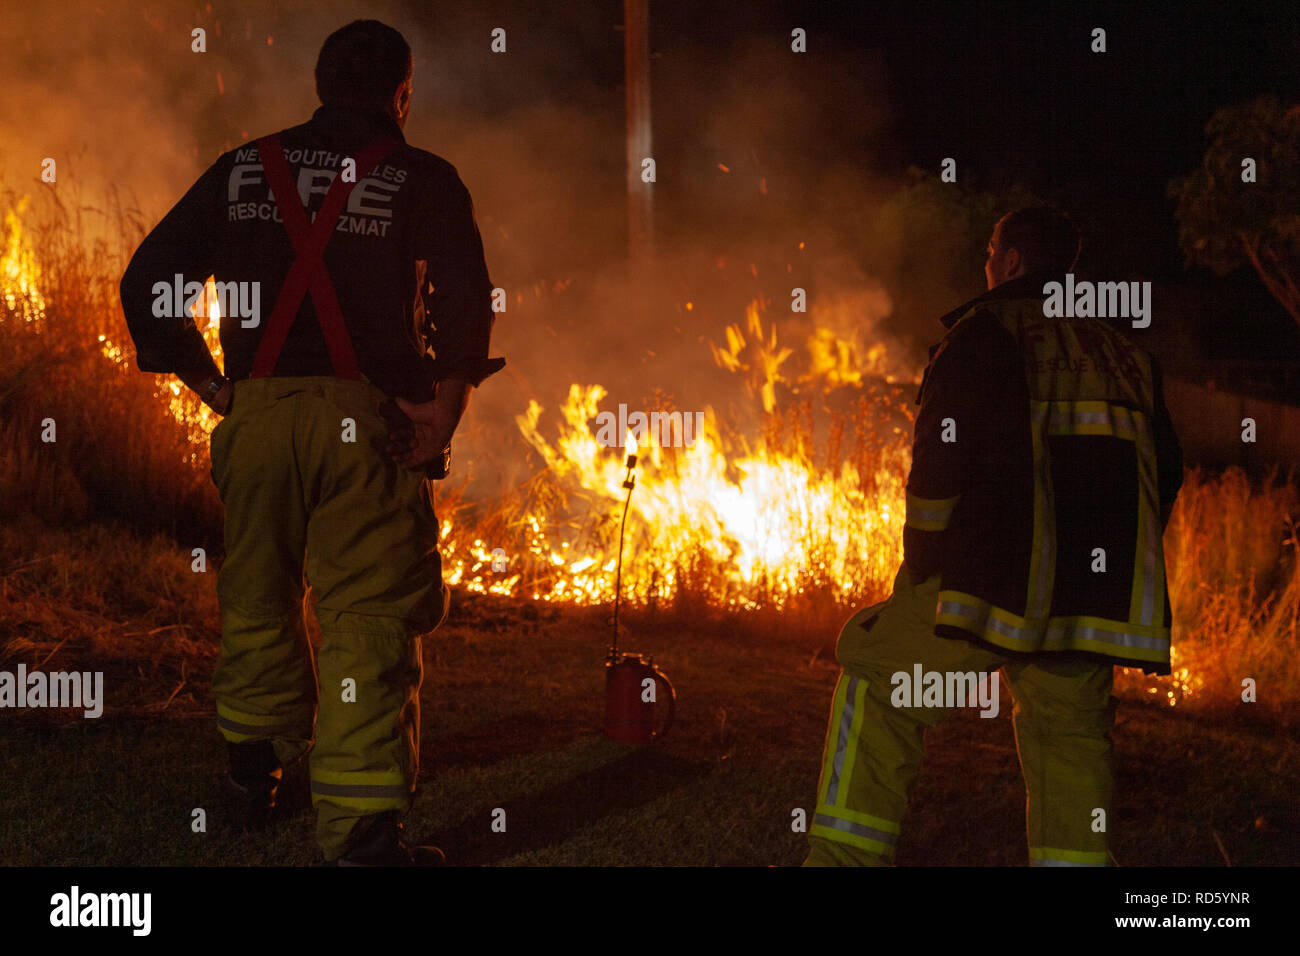 Teralba, NSW/Australia - October 24, 2012: Firemen or firefighters supervising backburning and extinguishing a wildfire grass and bushfire to protect  Stock Photo